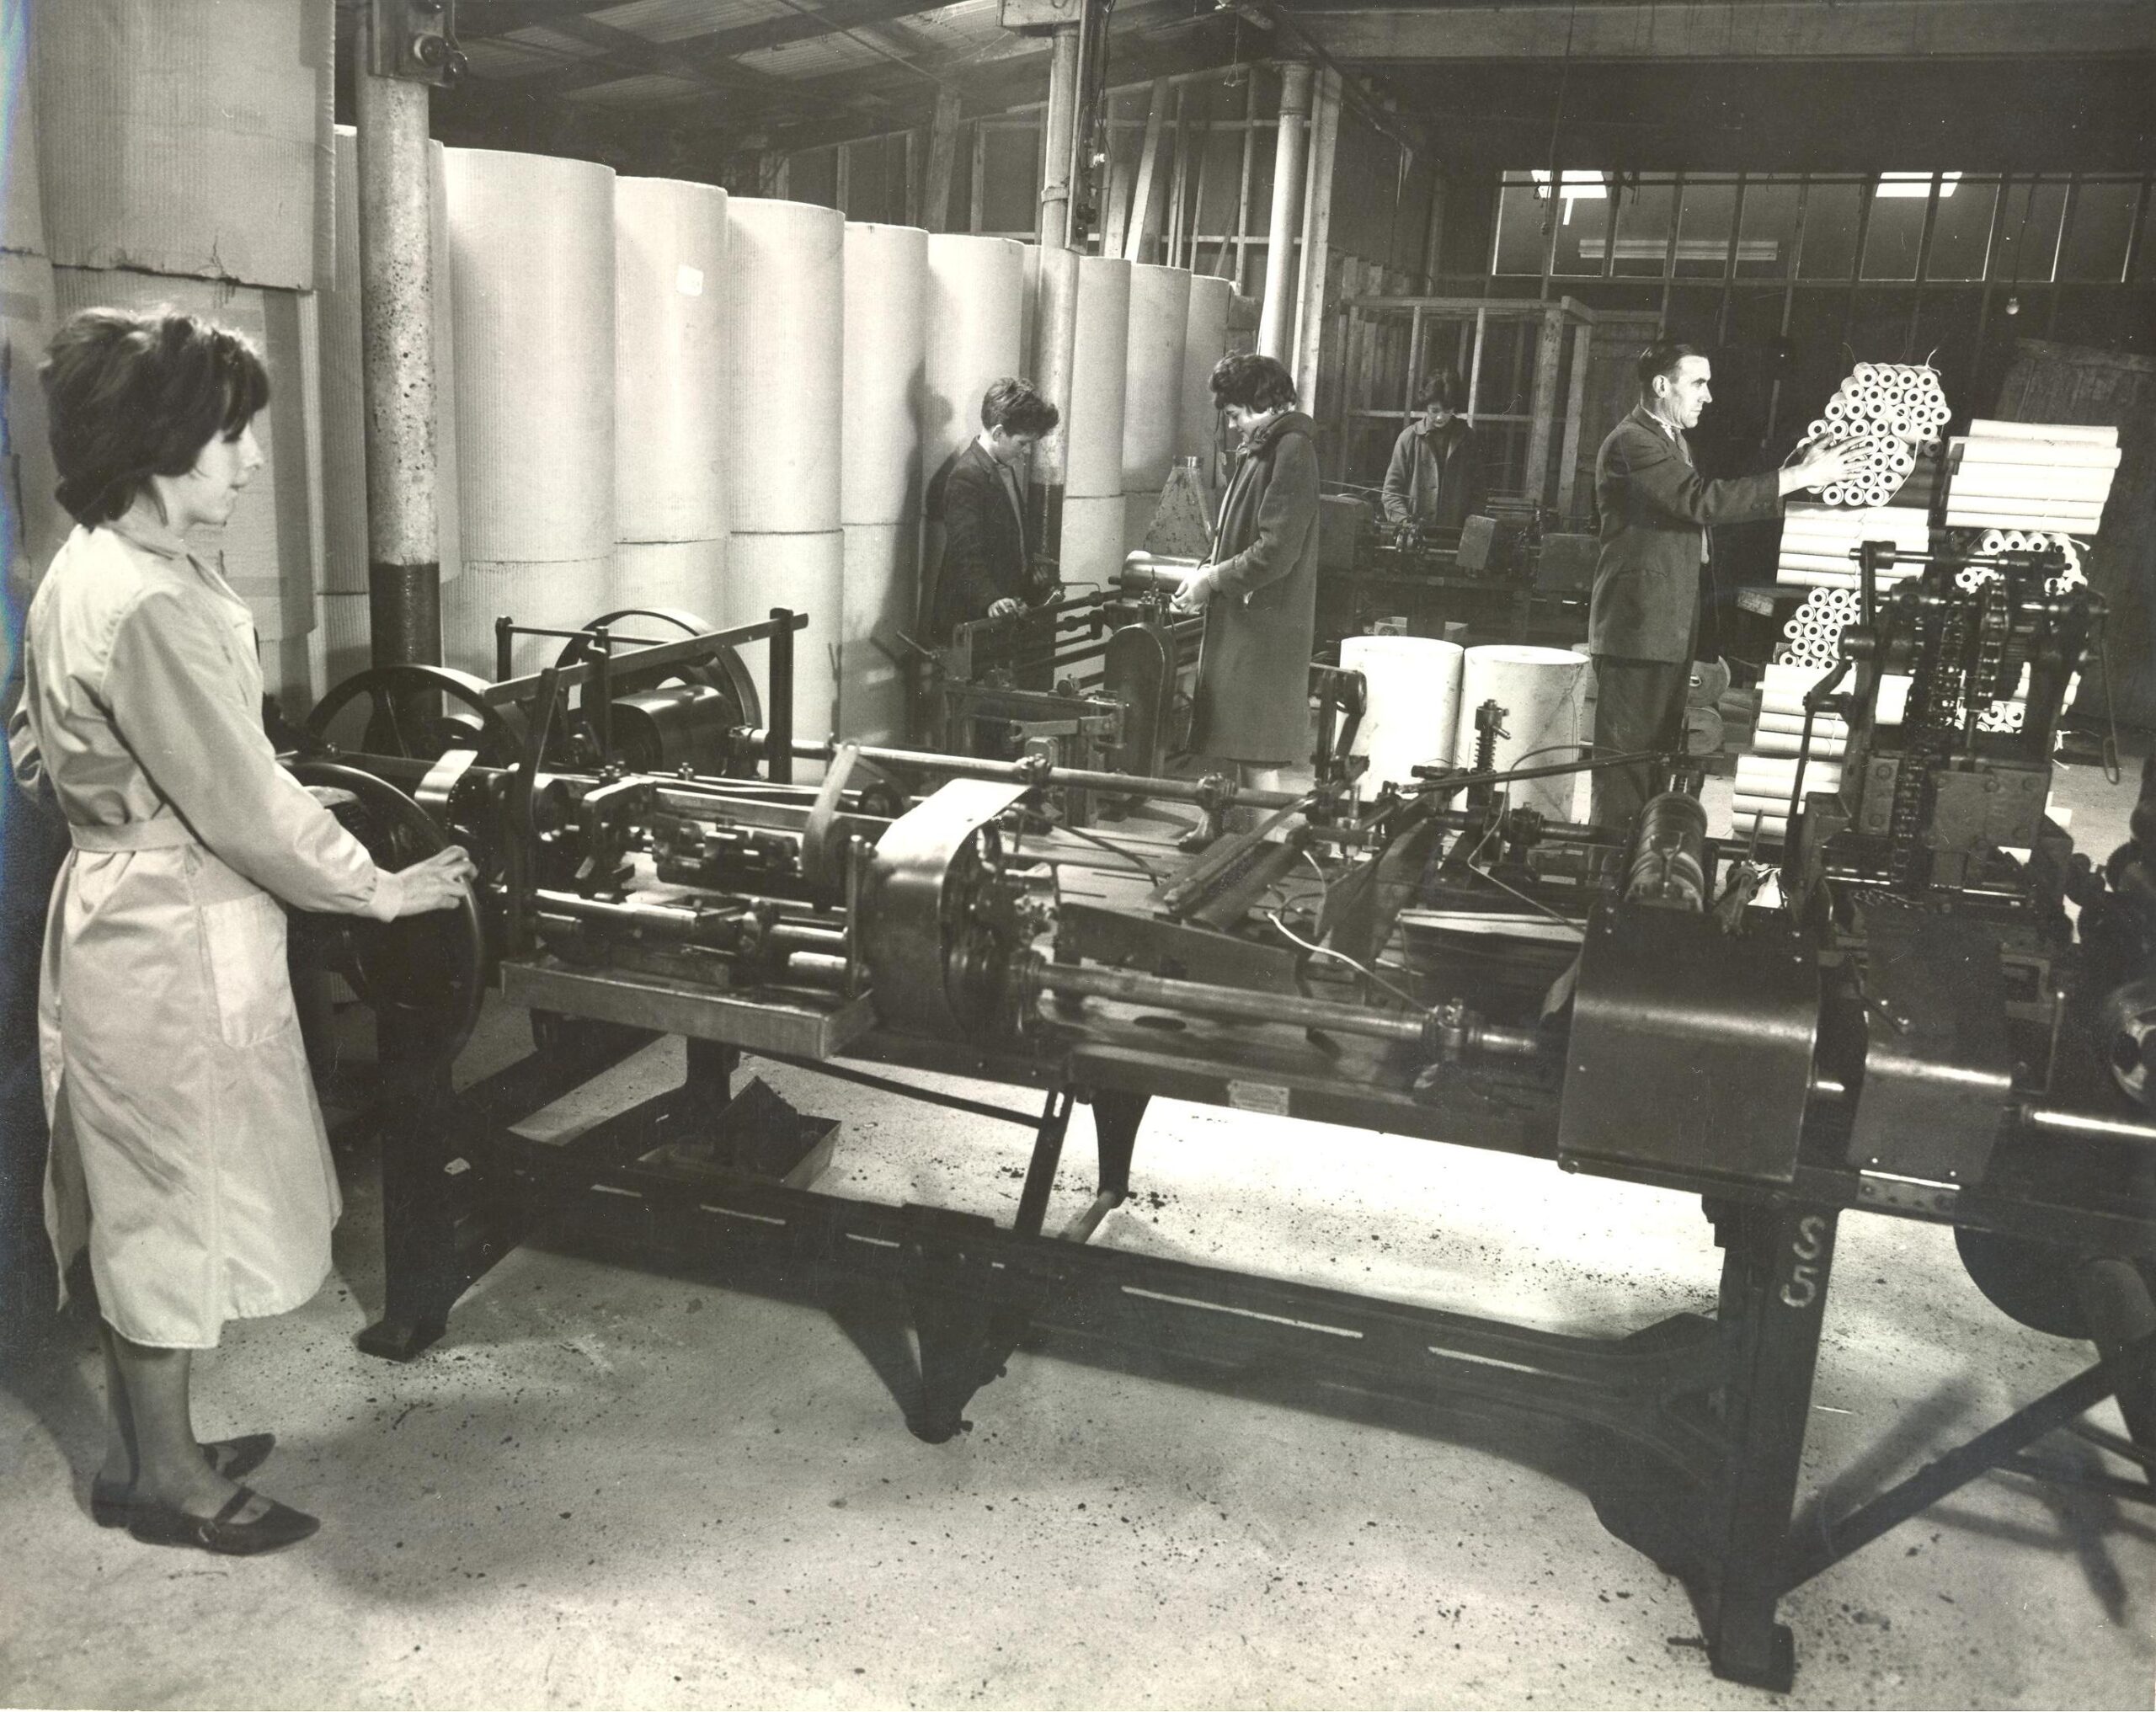 Workers and machines at the first Industrial Packaging plant